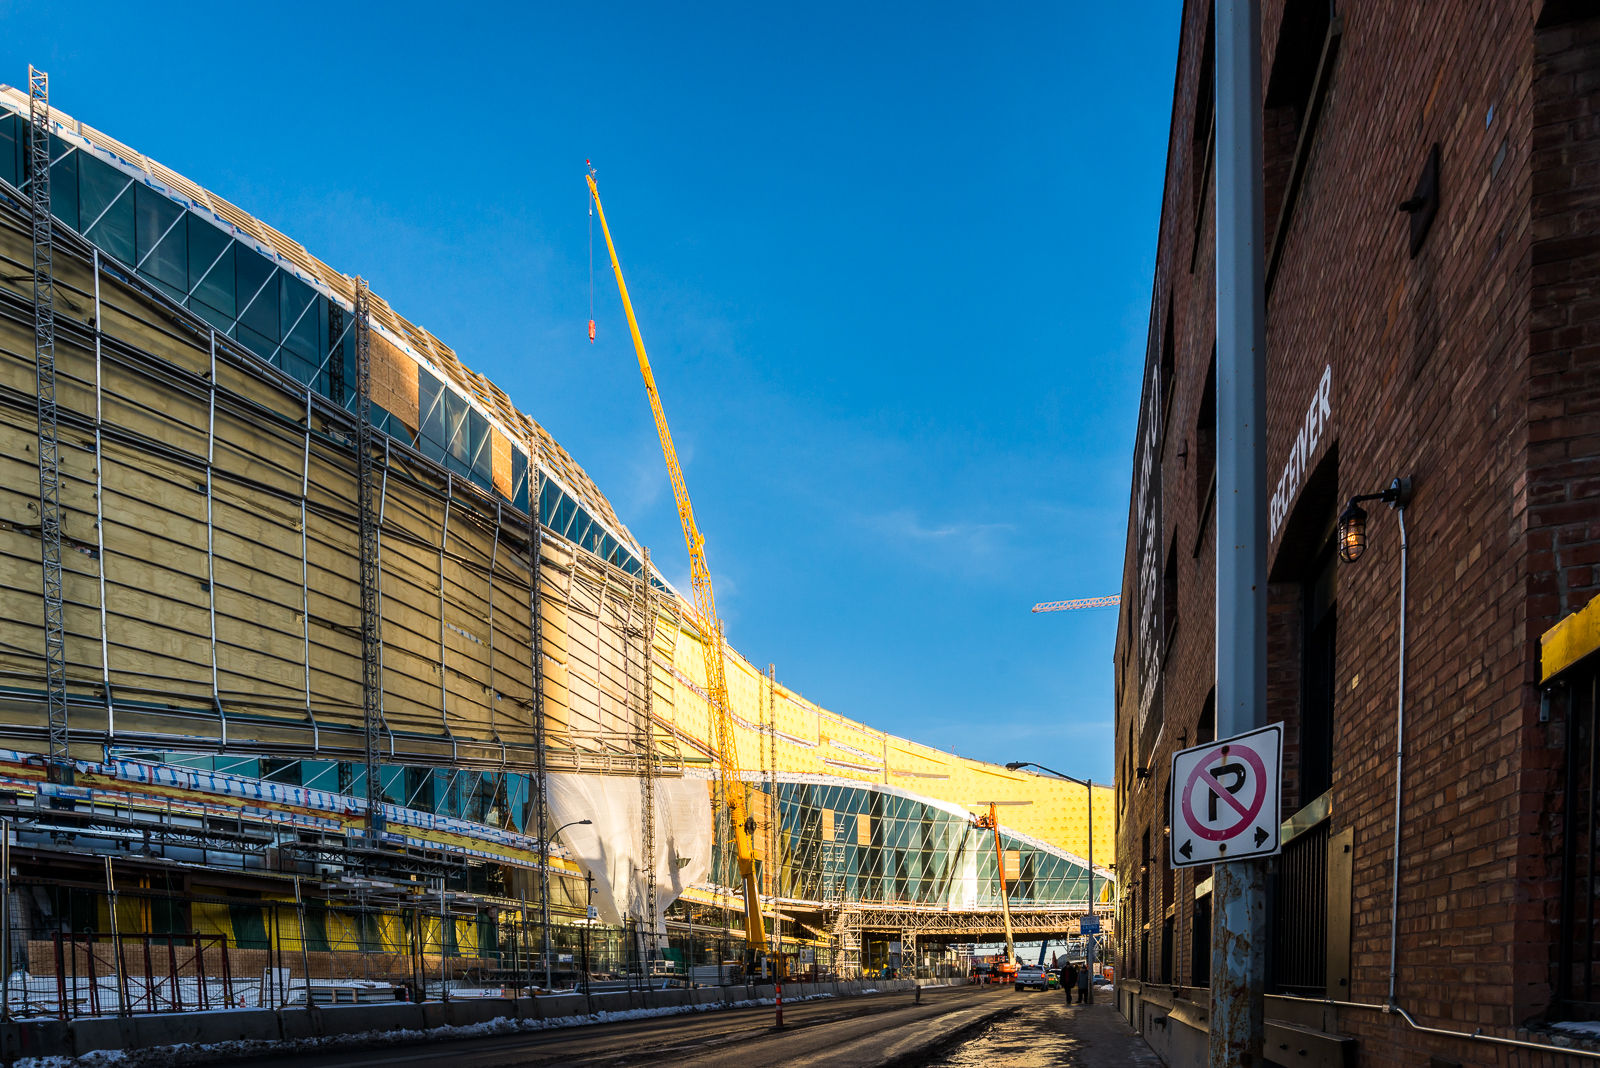 Rogers Place and the ICE District - HOK